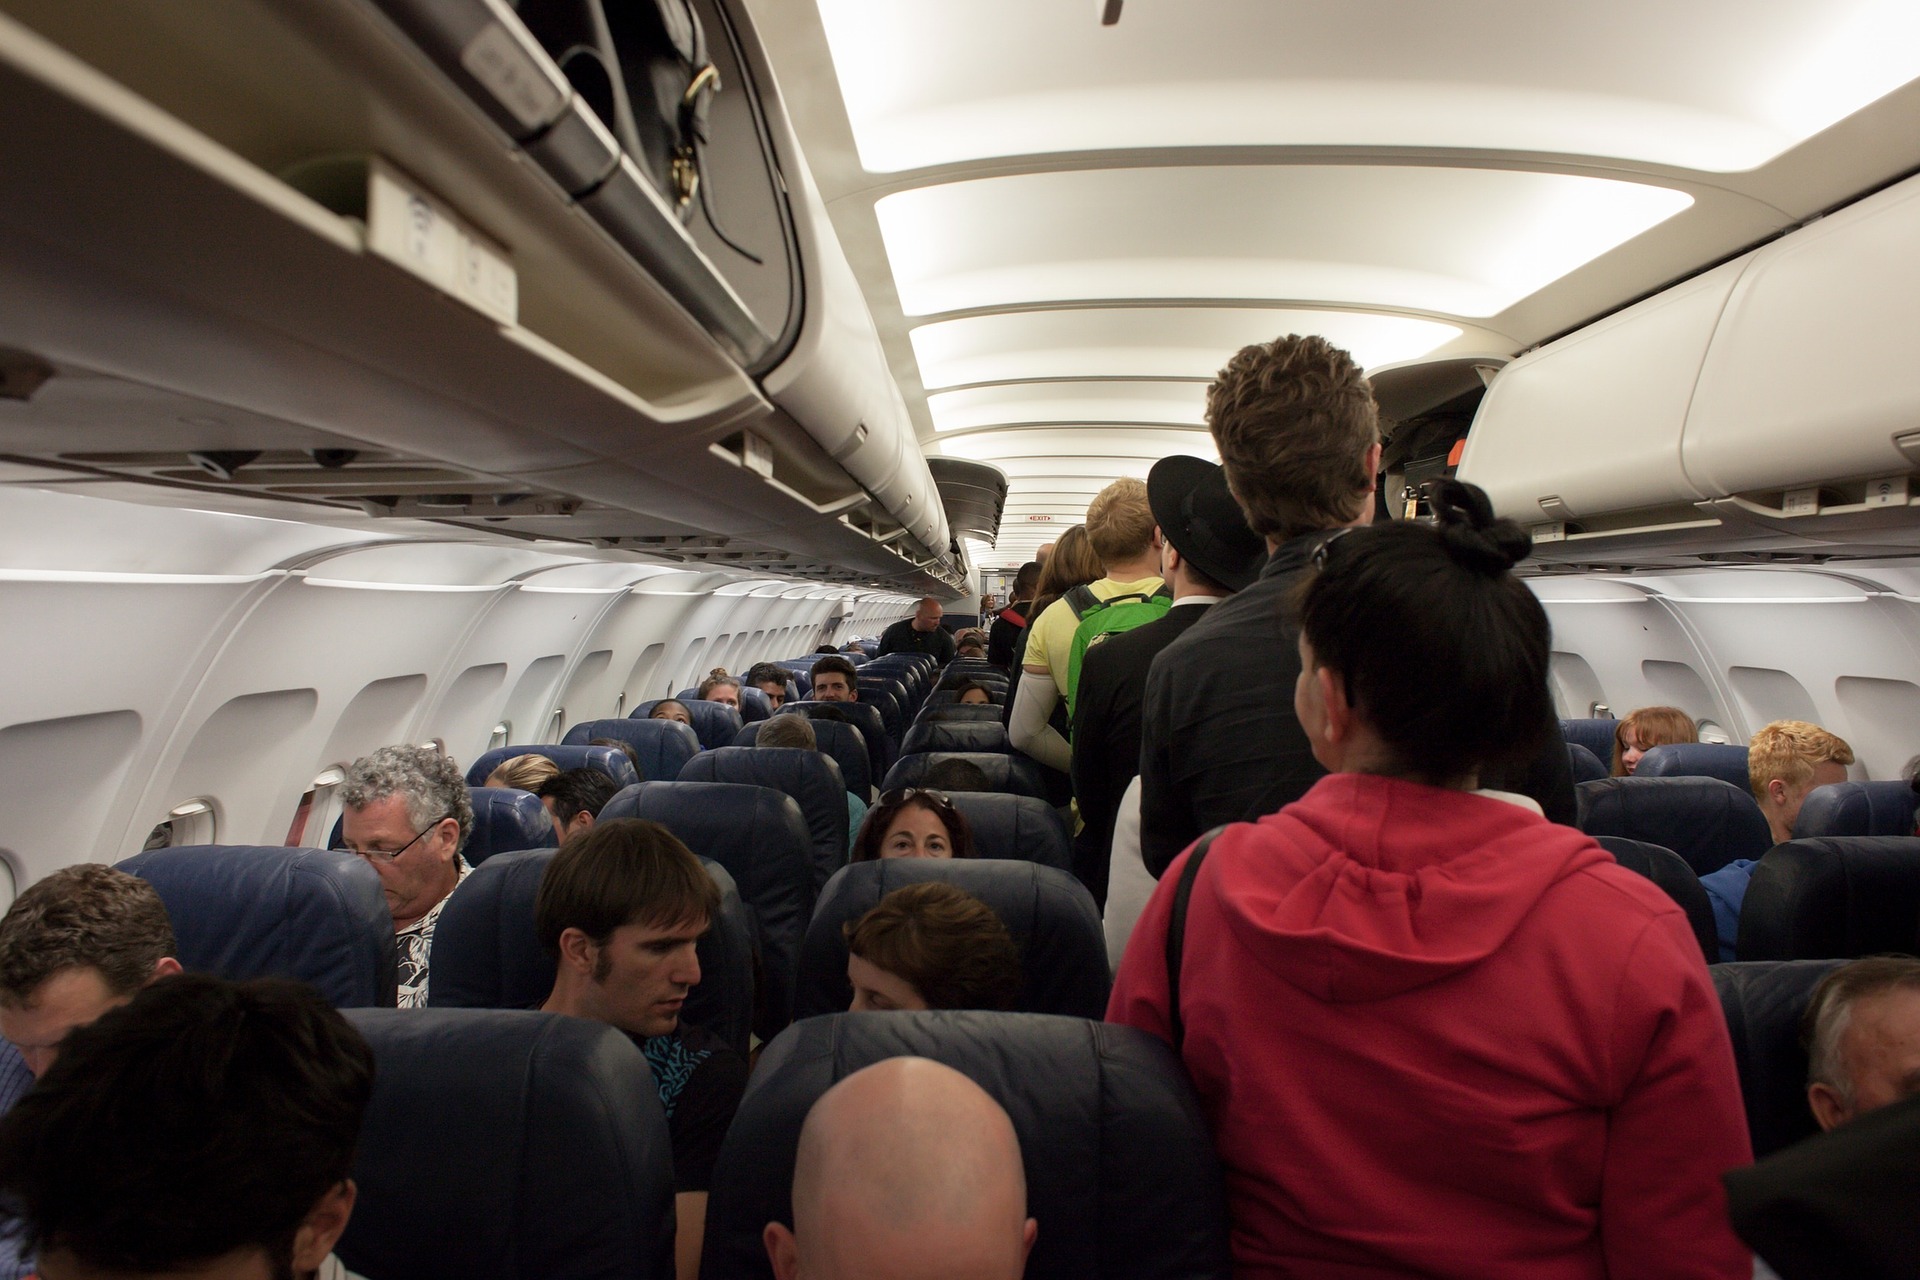 photo of passengers standing in plane aisle